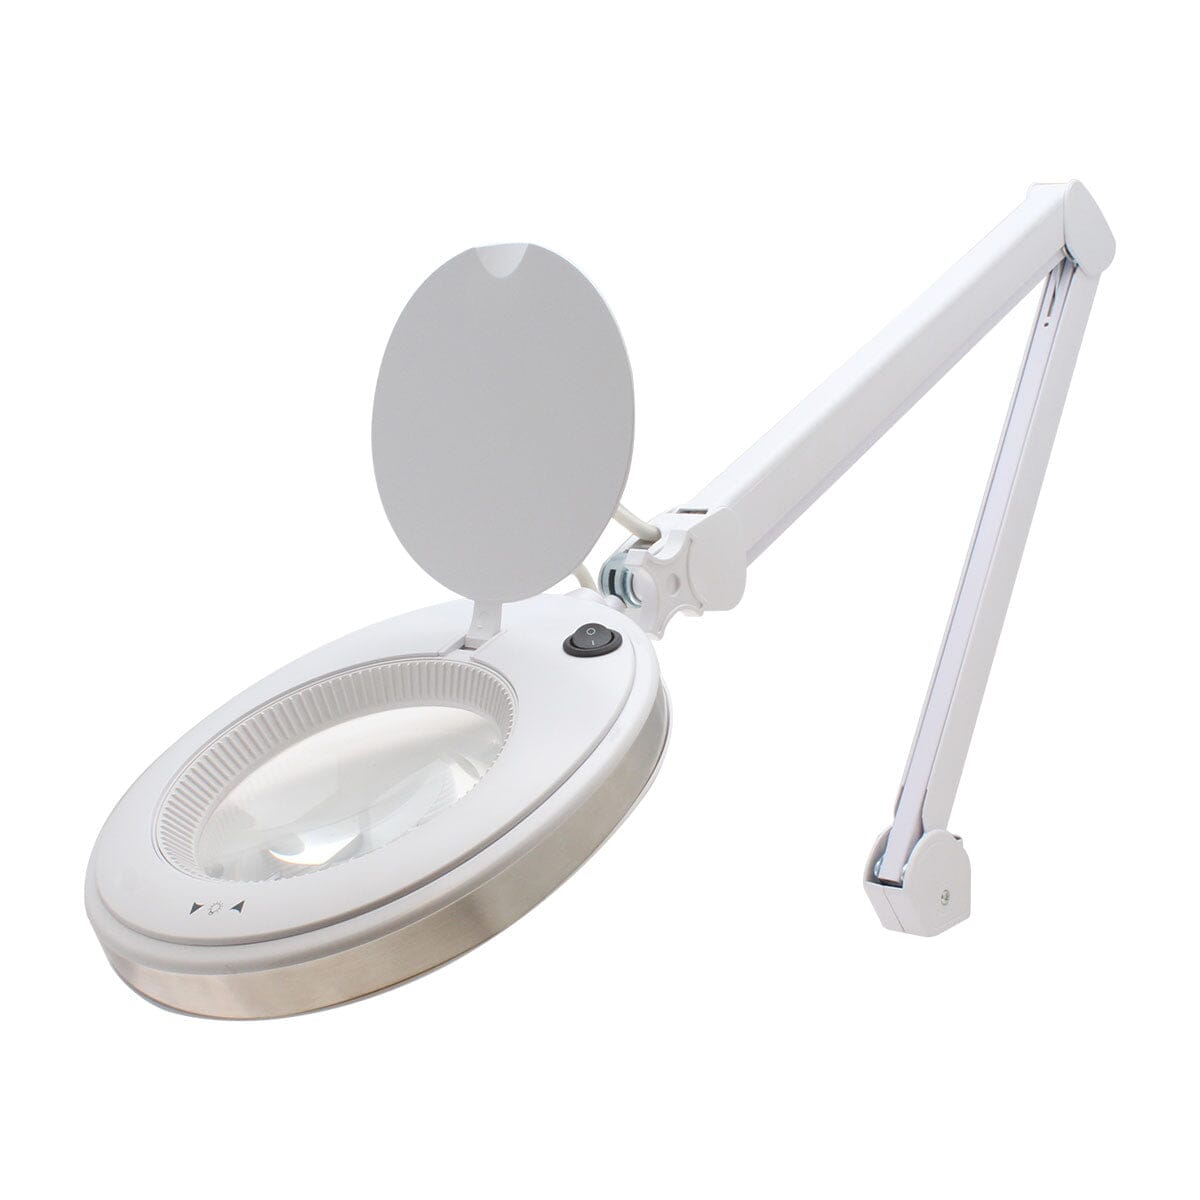 ProVue SuperSlim LED Magnifying Lamp 5-Diopter